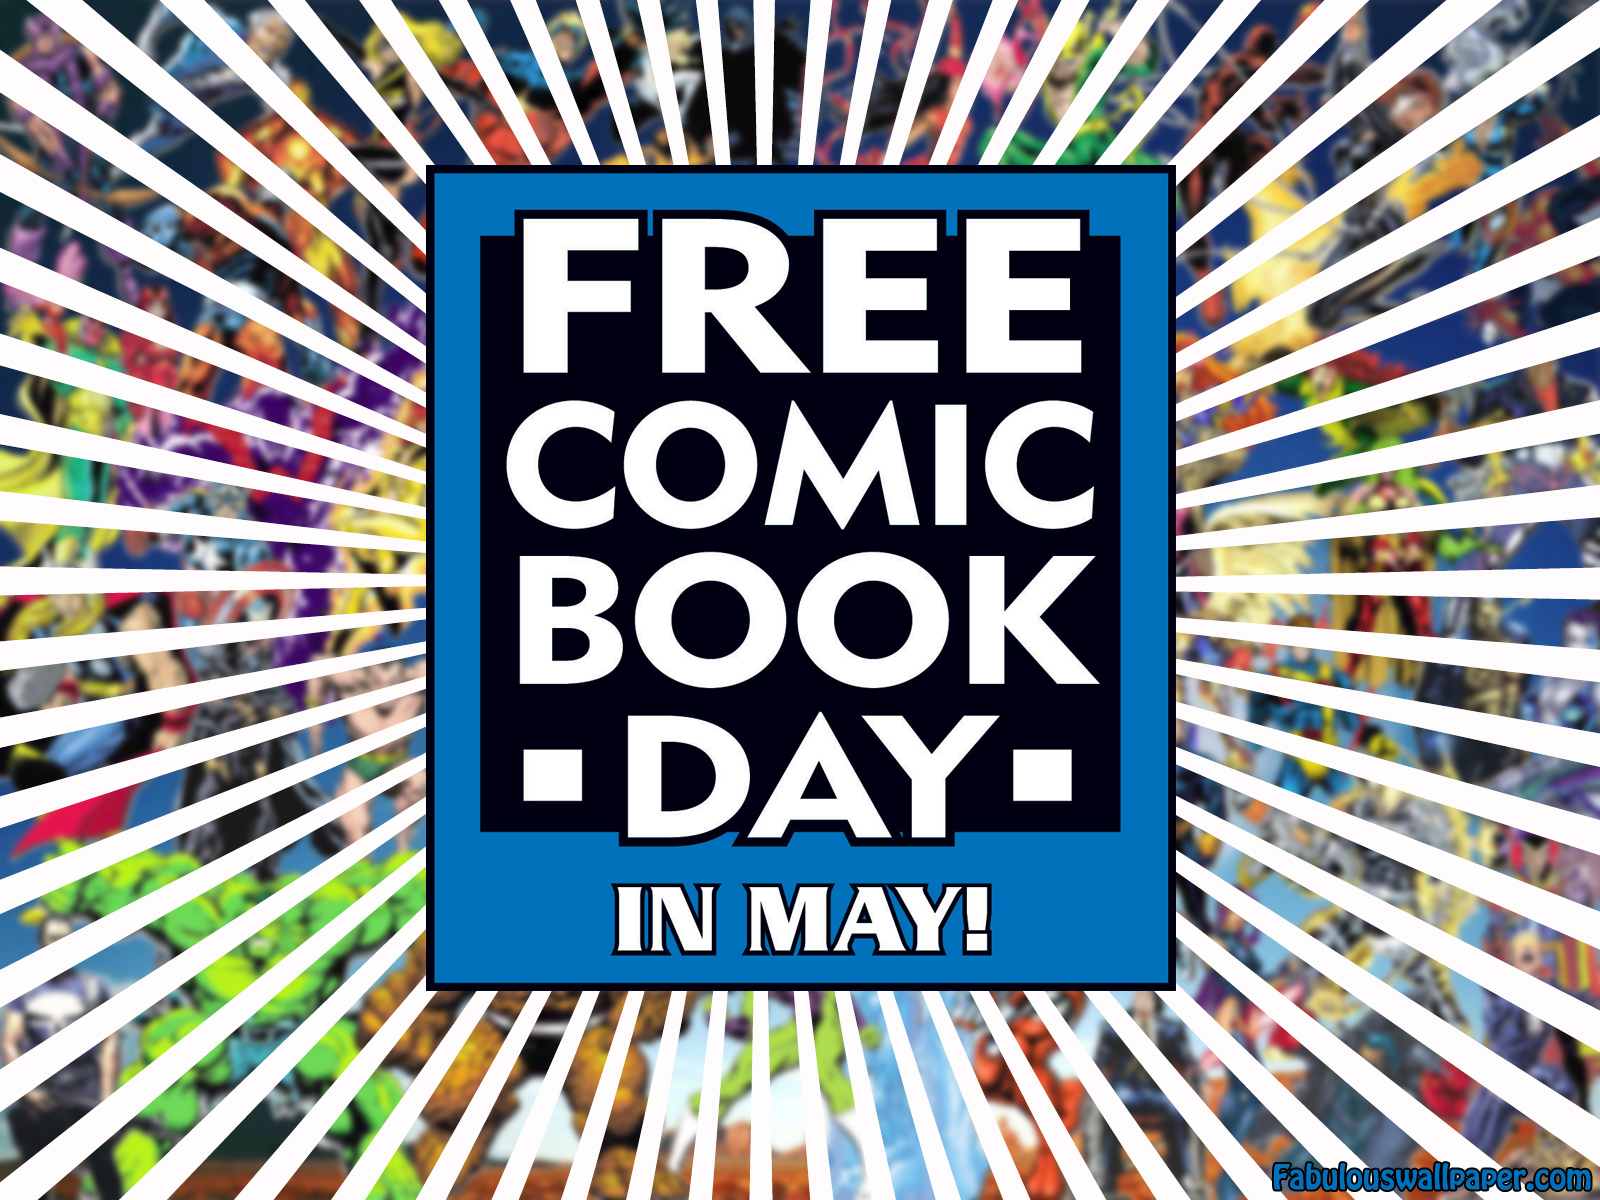 Free comic book day 2015 is almost here!